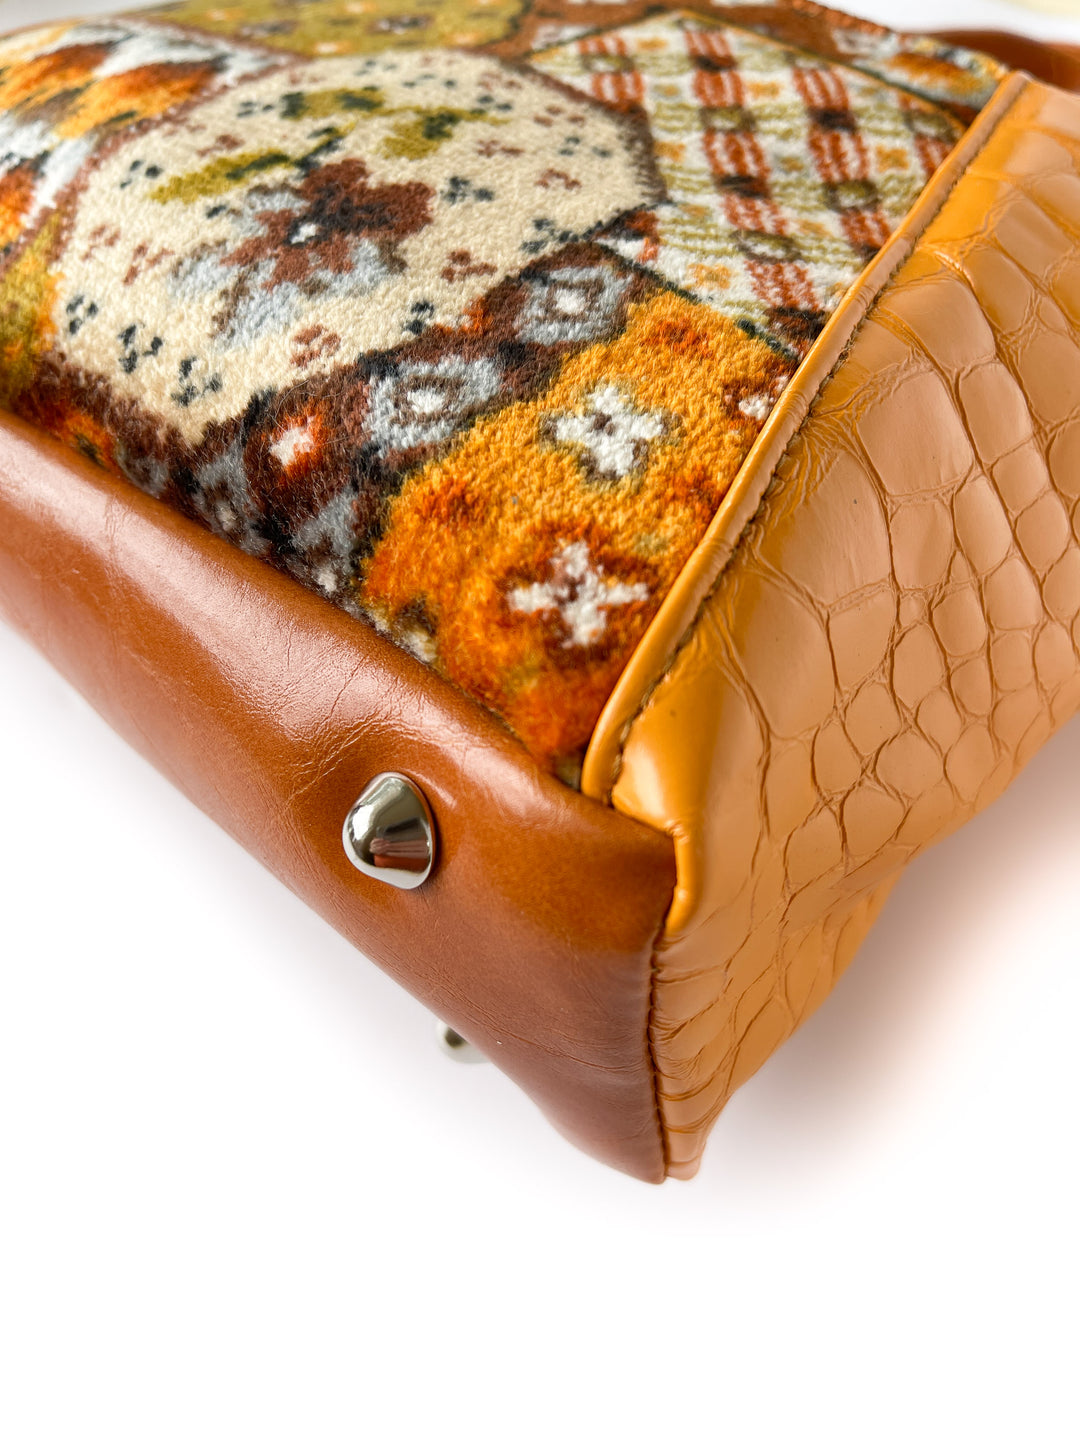 Mini Troubadour Tote - Butterscotch with Crocodile Embossed Leather and Patchwork Chenille